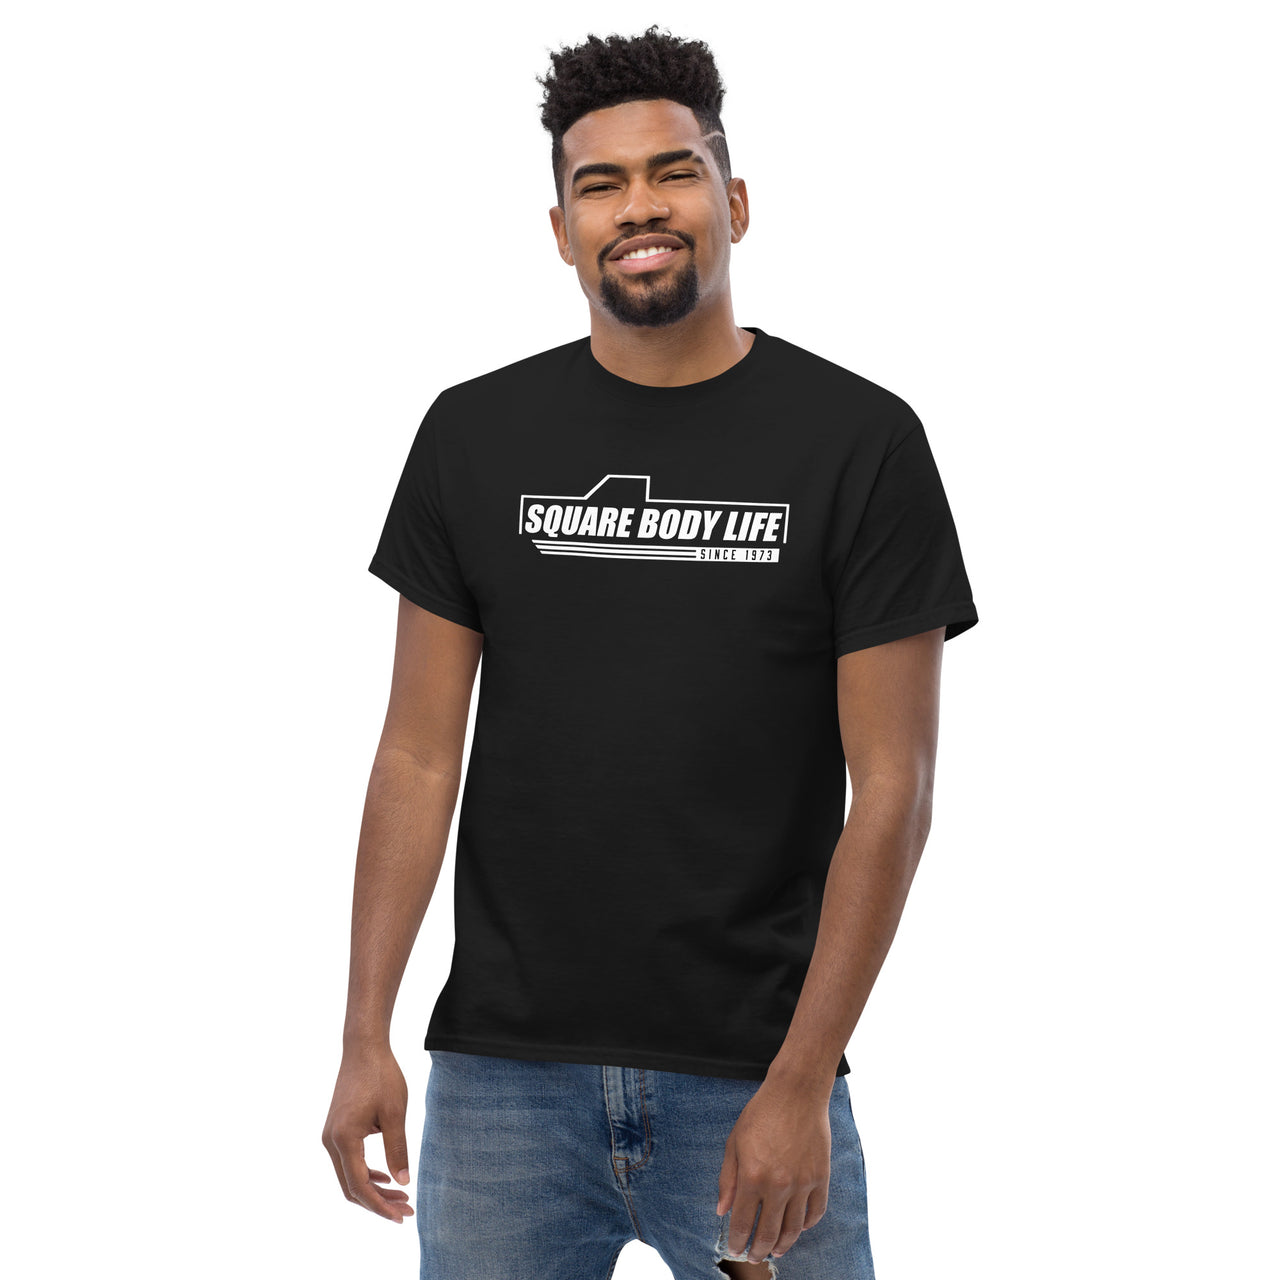 Square Body Life Truck T-Shirt modeled in black